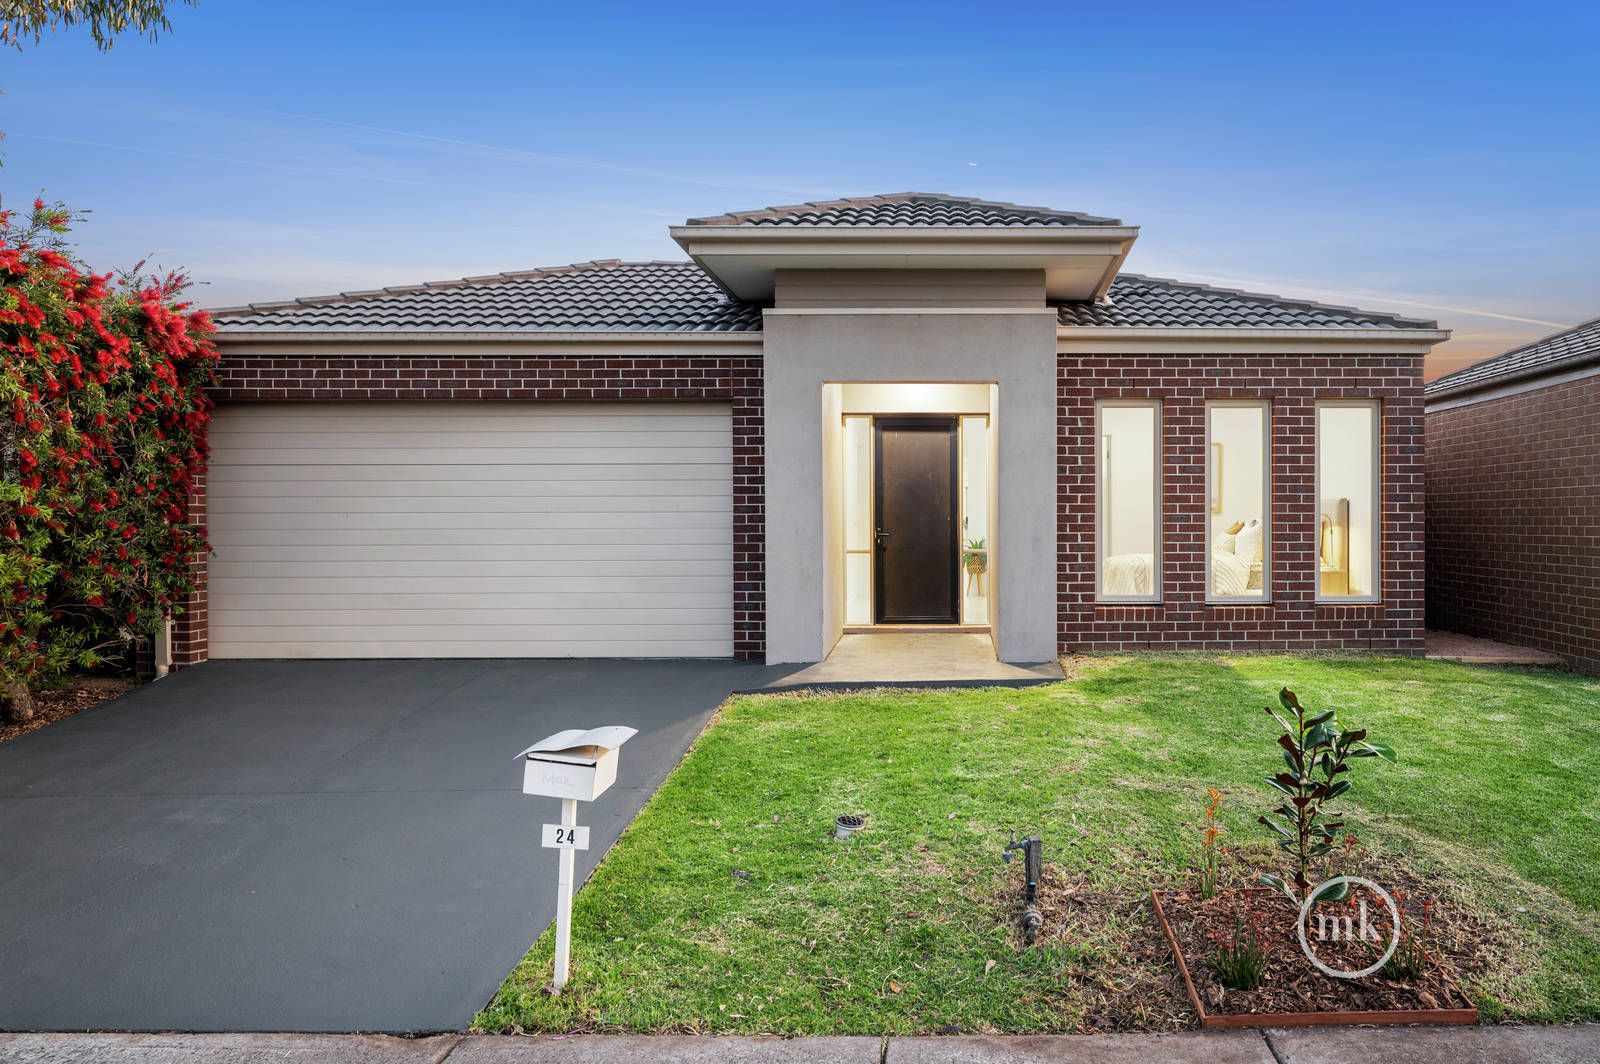 4 bedrooms House in 24 Succession Street DOREEN VIC, 3754